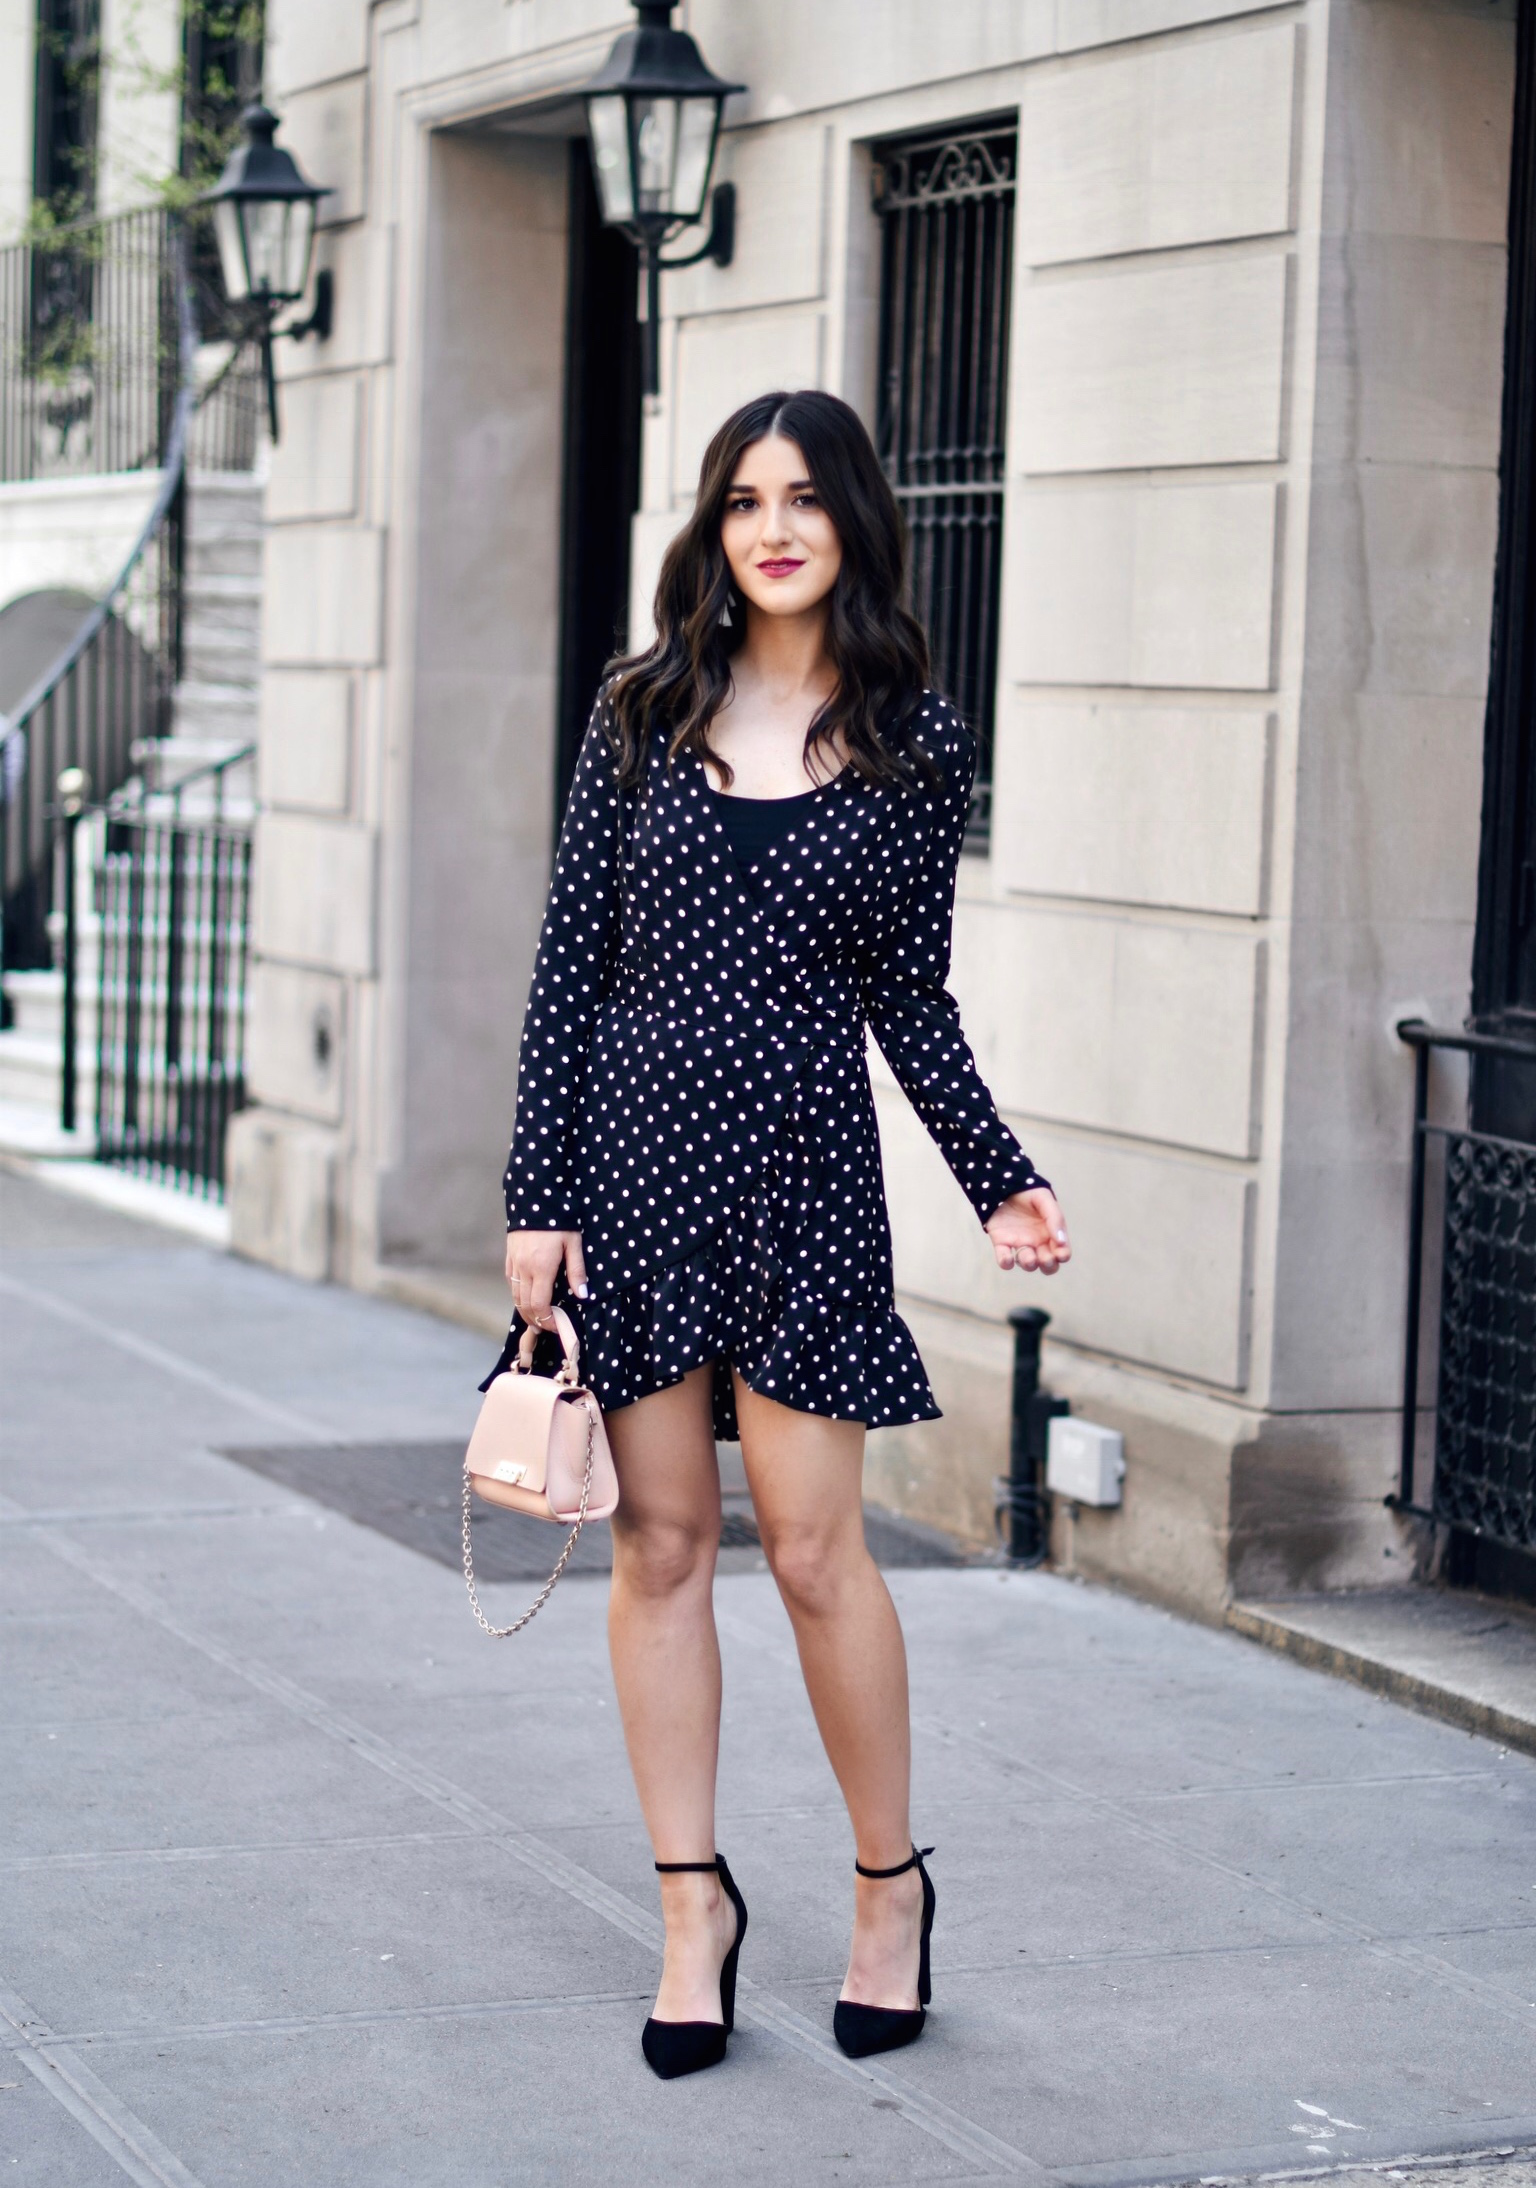 Polka Dot Wrap Dress Statement Earrings My 5 Blogging Rules While On My Honeymoon Esther Santer Fashion Blog NYC Street Style Blogger Outfit OOTD Trendy Kendra Scott ASOS Travel Content Married Husband Happy Summer Bag Beautiful Pointy Toe Ankle Strap.JPG